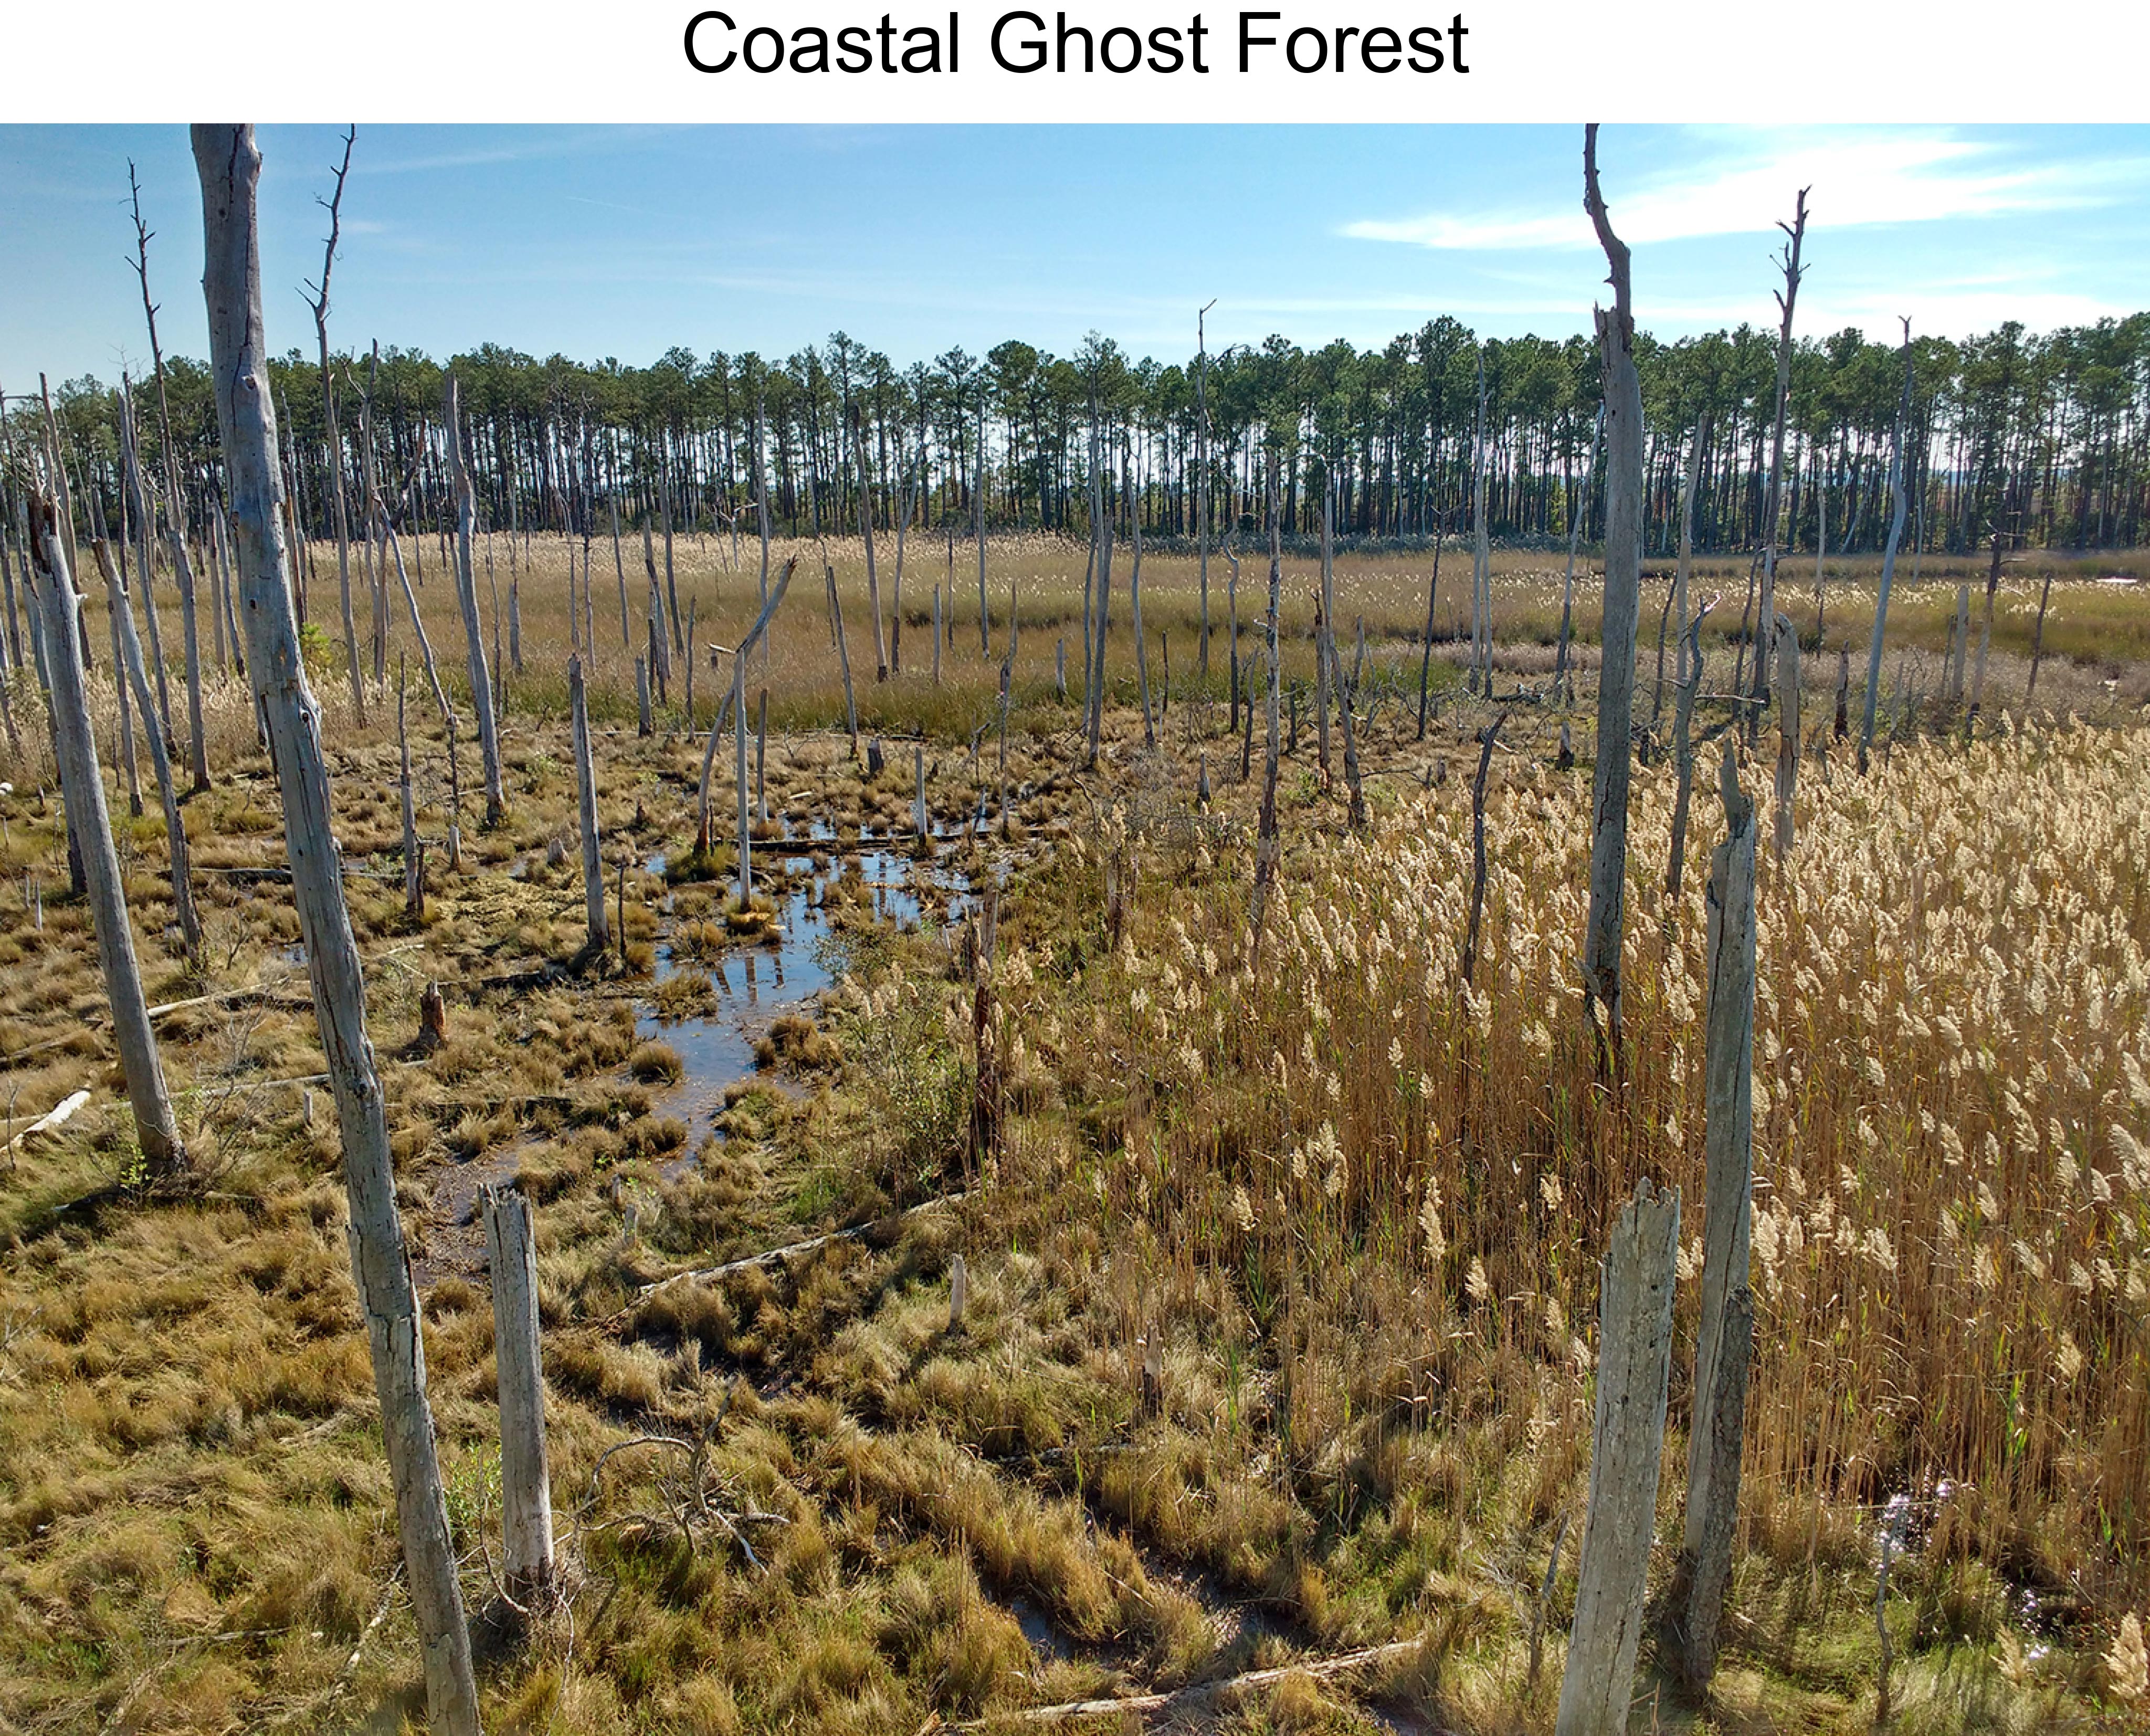 Coastal Ghost Forest